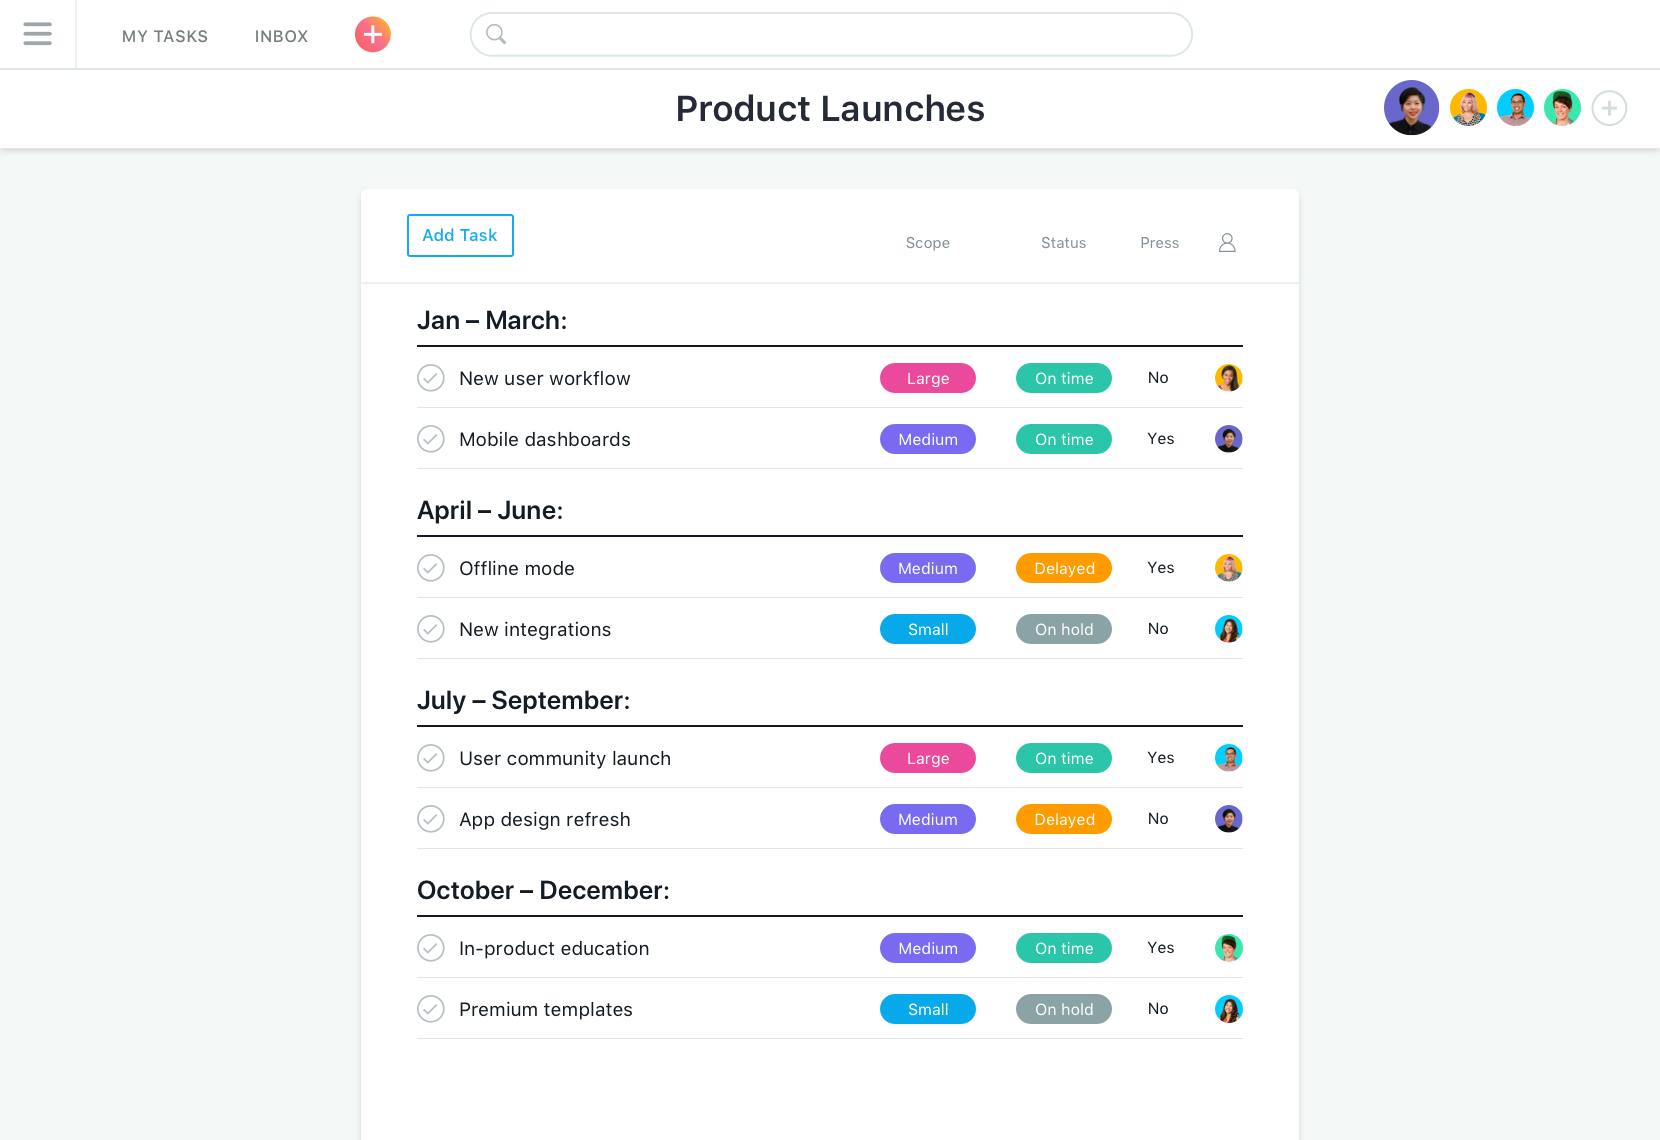 Overview of a product launch timeline in Asana